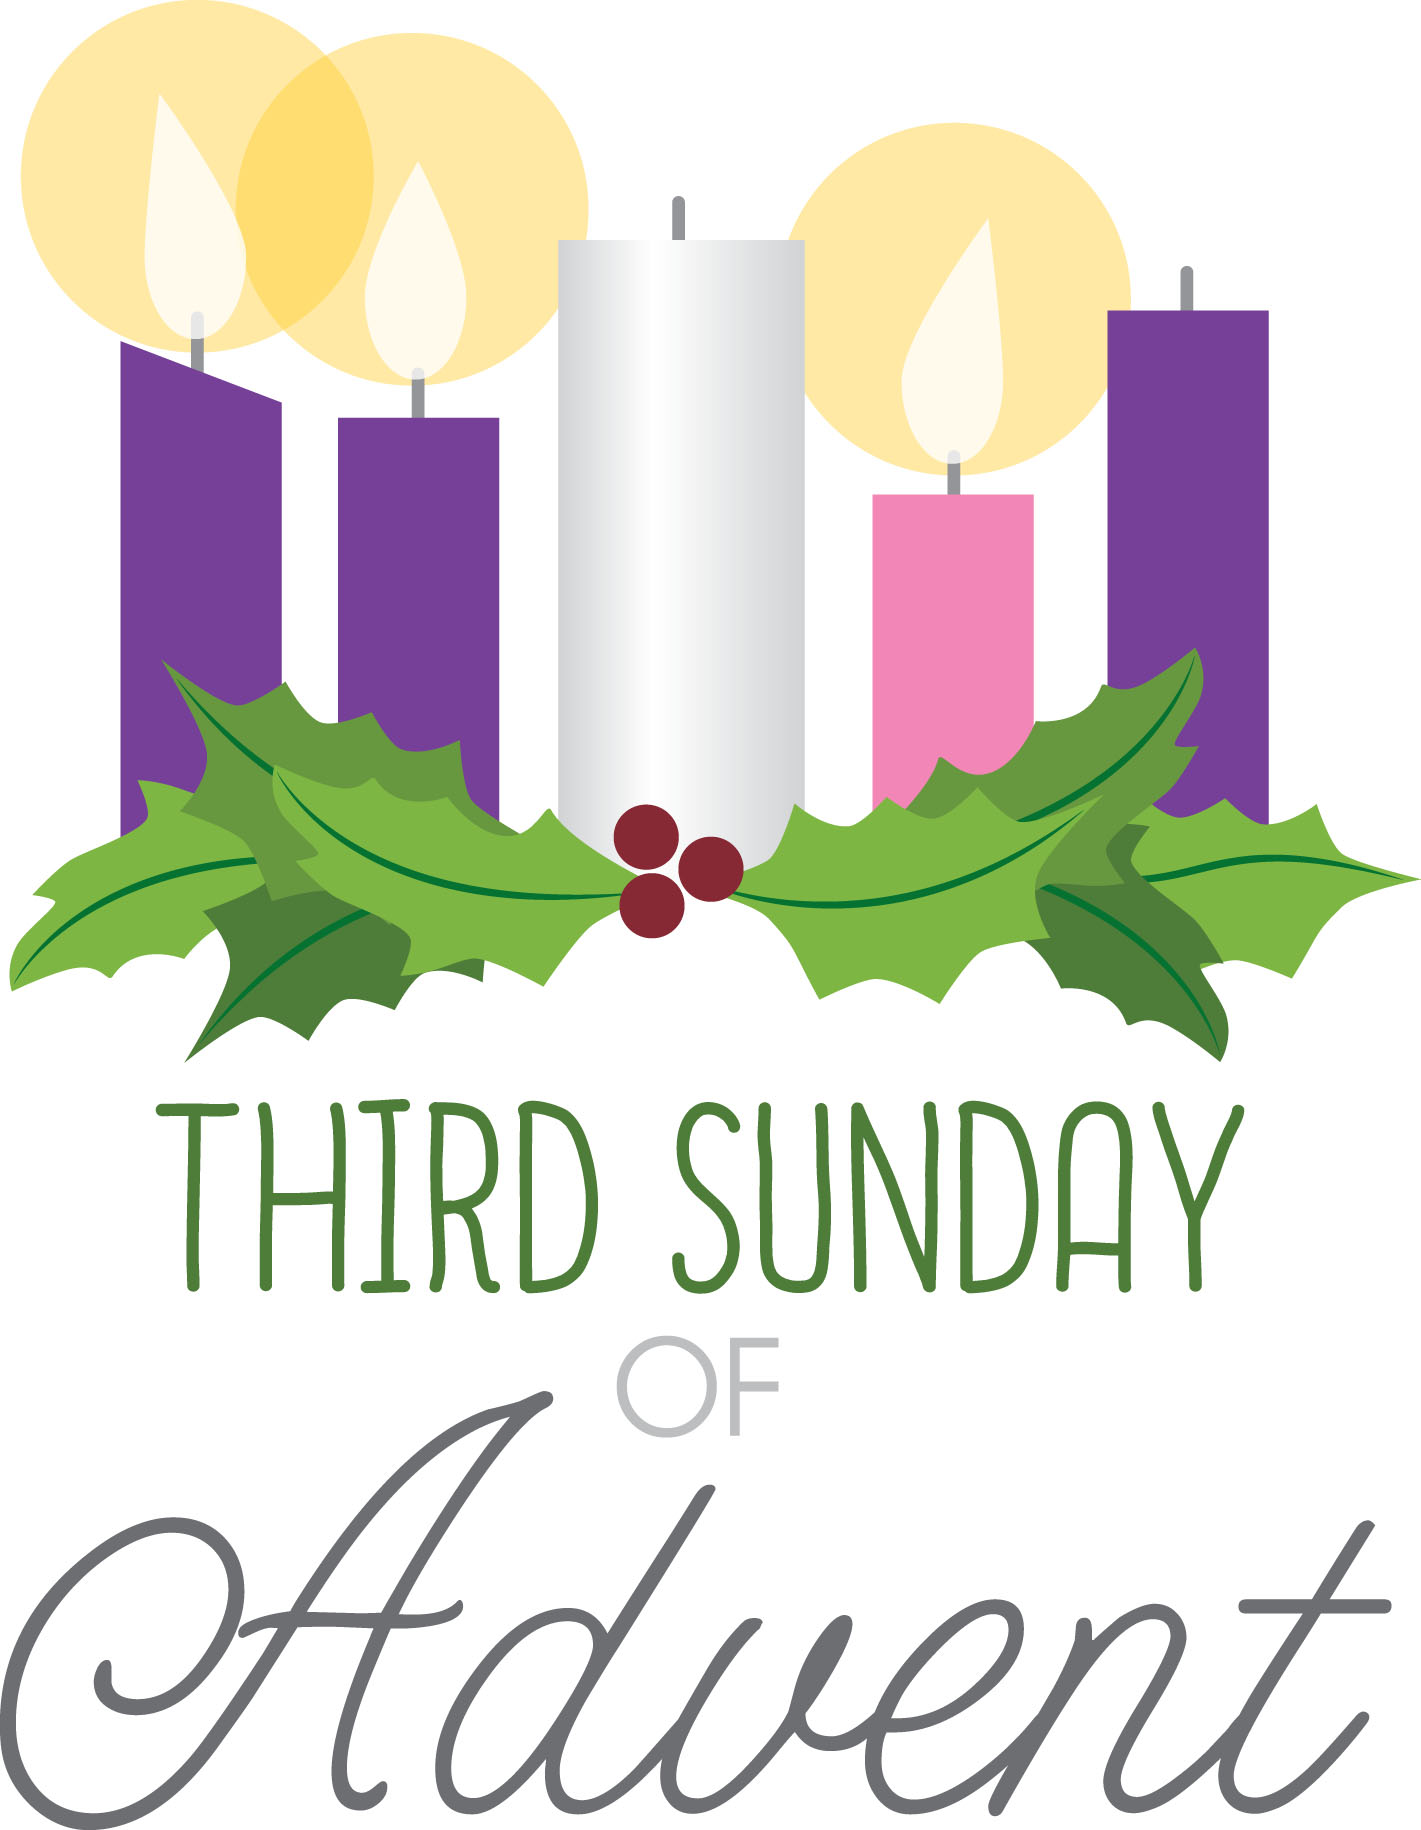 Third Sunday of Advent | Central United Methodist Church : Central ...